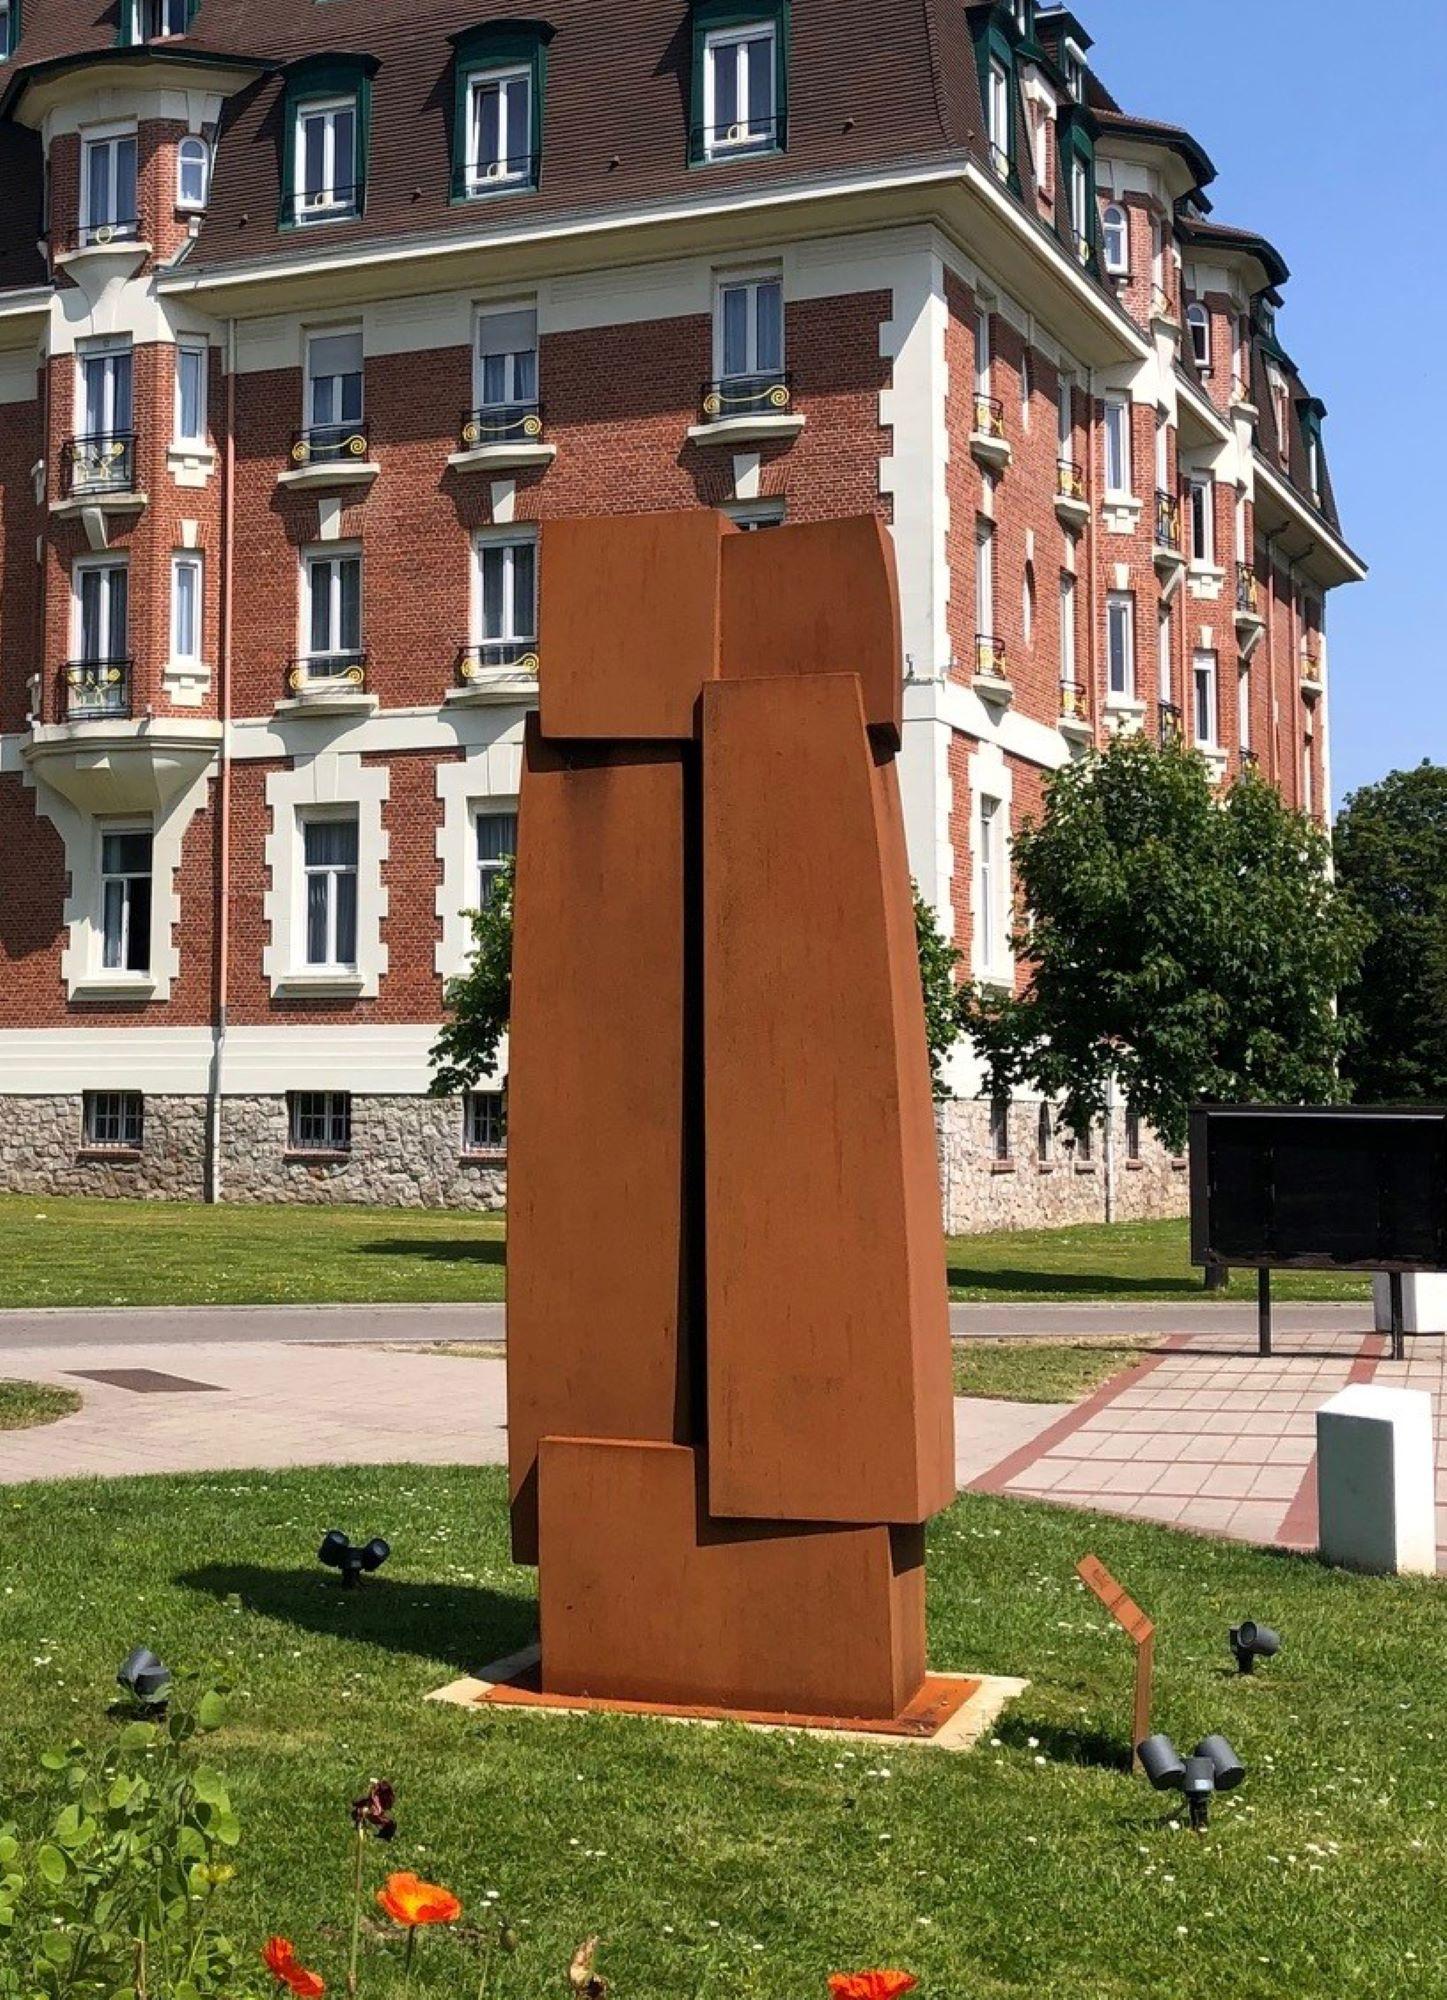 Unity I is a corten steel sculpture with chamotte sculpture by contemporary artist Delphine Brabant, dimensions are 300 × 70 × 50 cm (18.1 × 27.6 × 19.7 in). 
The sculpture is signed and numbered, it is part of a limited edition of 8 editions + 4